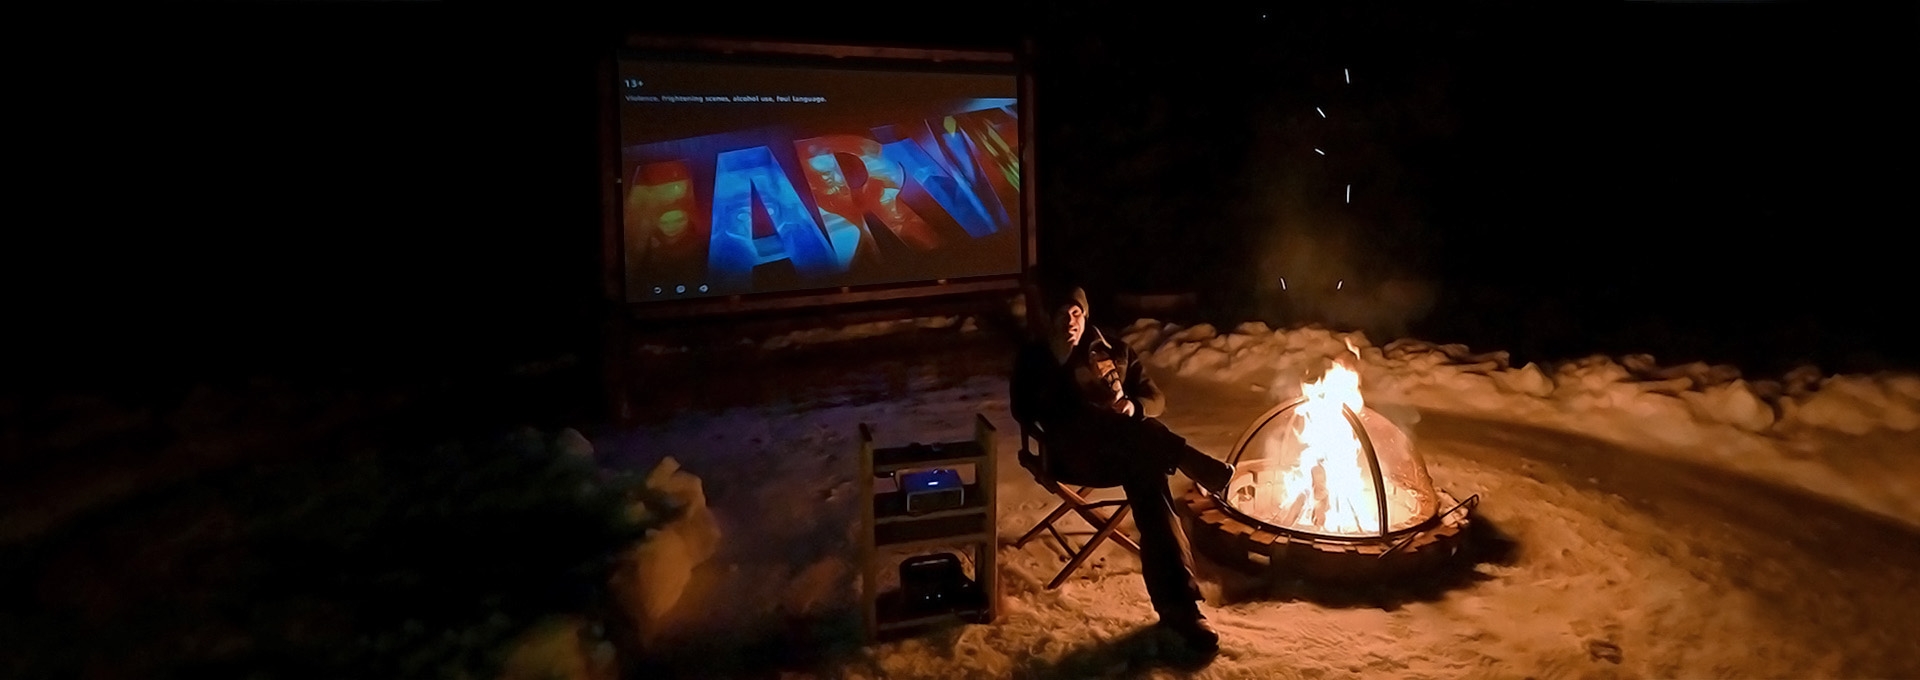 Todd Morton, founder of the Wireless Outdoor Cinema Company, sitting next to a bonfire in the winter.